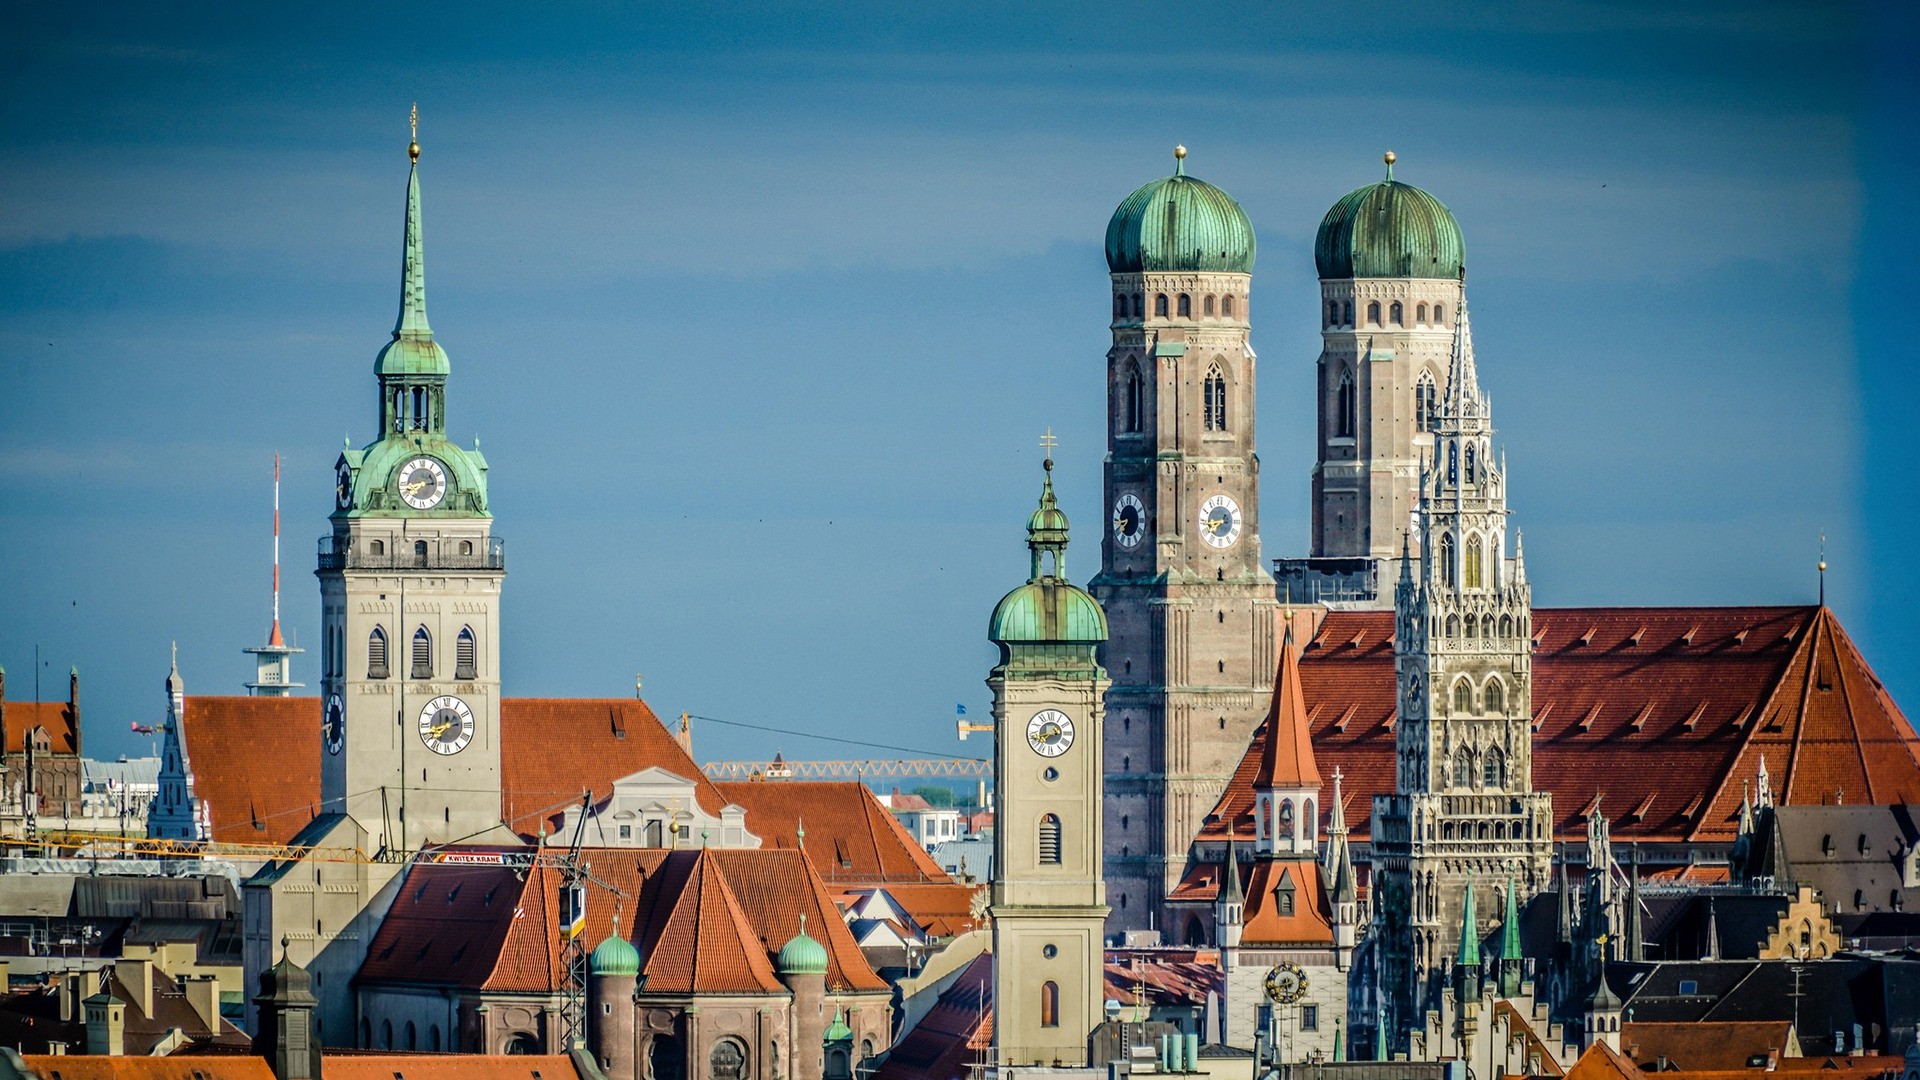 cityscape, Architecture, Tower, Old building, Germany, Munich, Church, Rooftops, Clock towers, Clouds, Cathedral Wallpaper